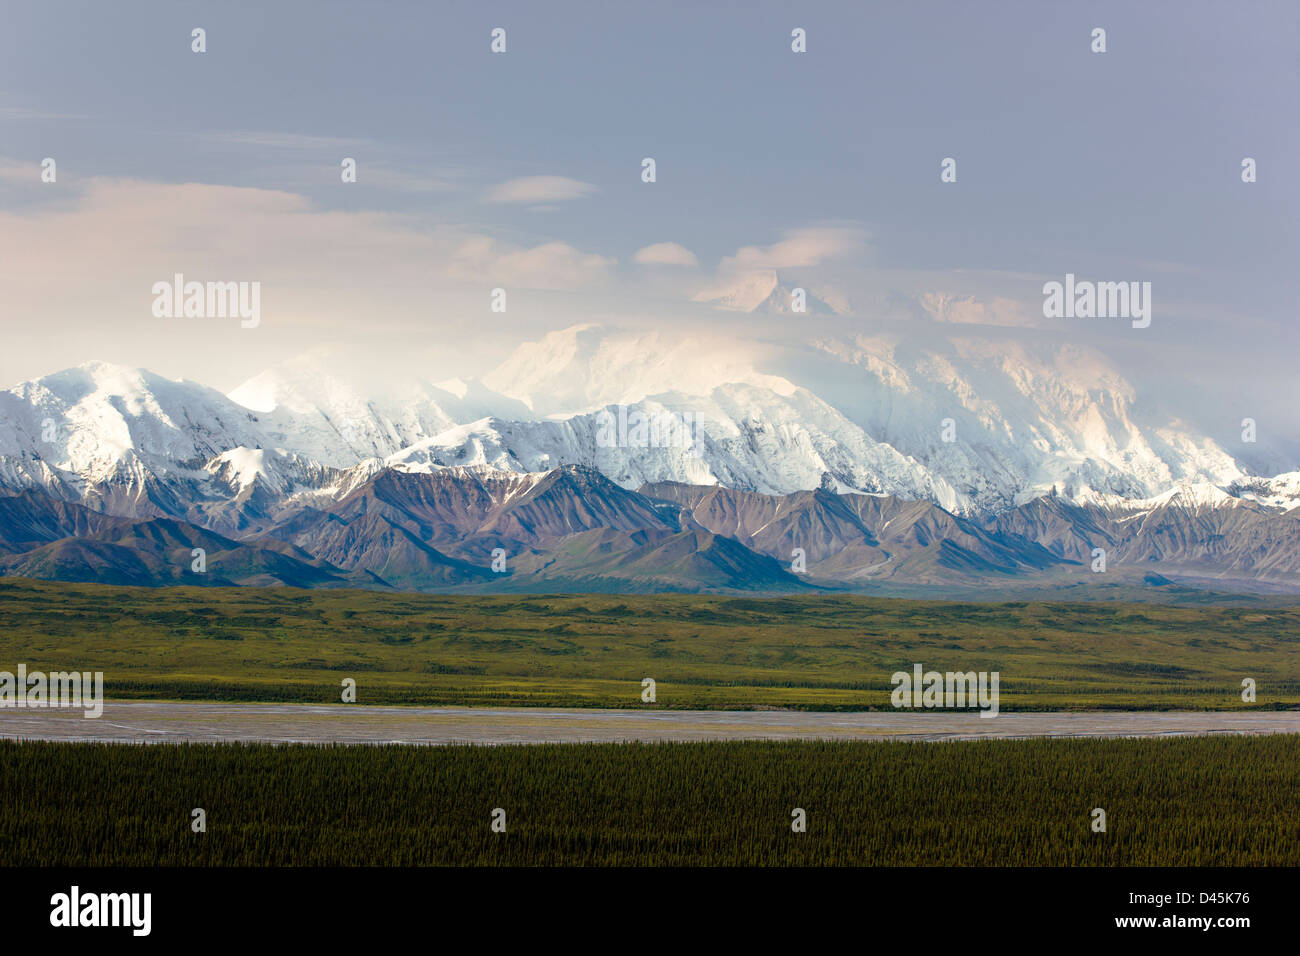 Mt. McKinley (Denali Mountain), highest point in North America (20,320') viewed from the west side of Denali National Park, AK Stock Photo